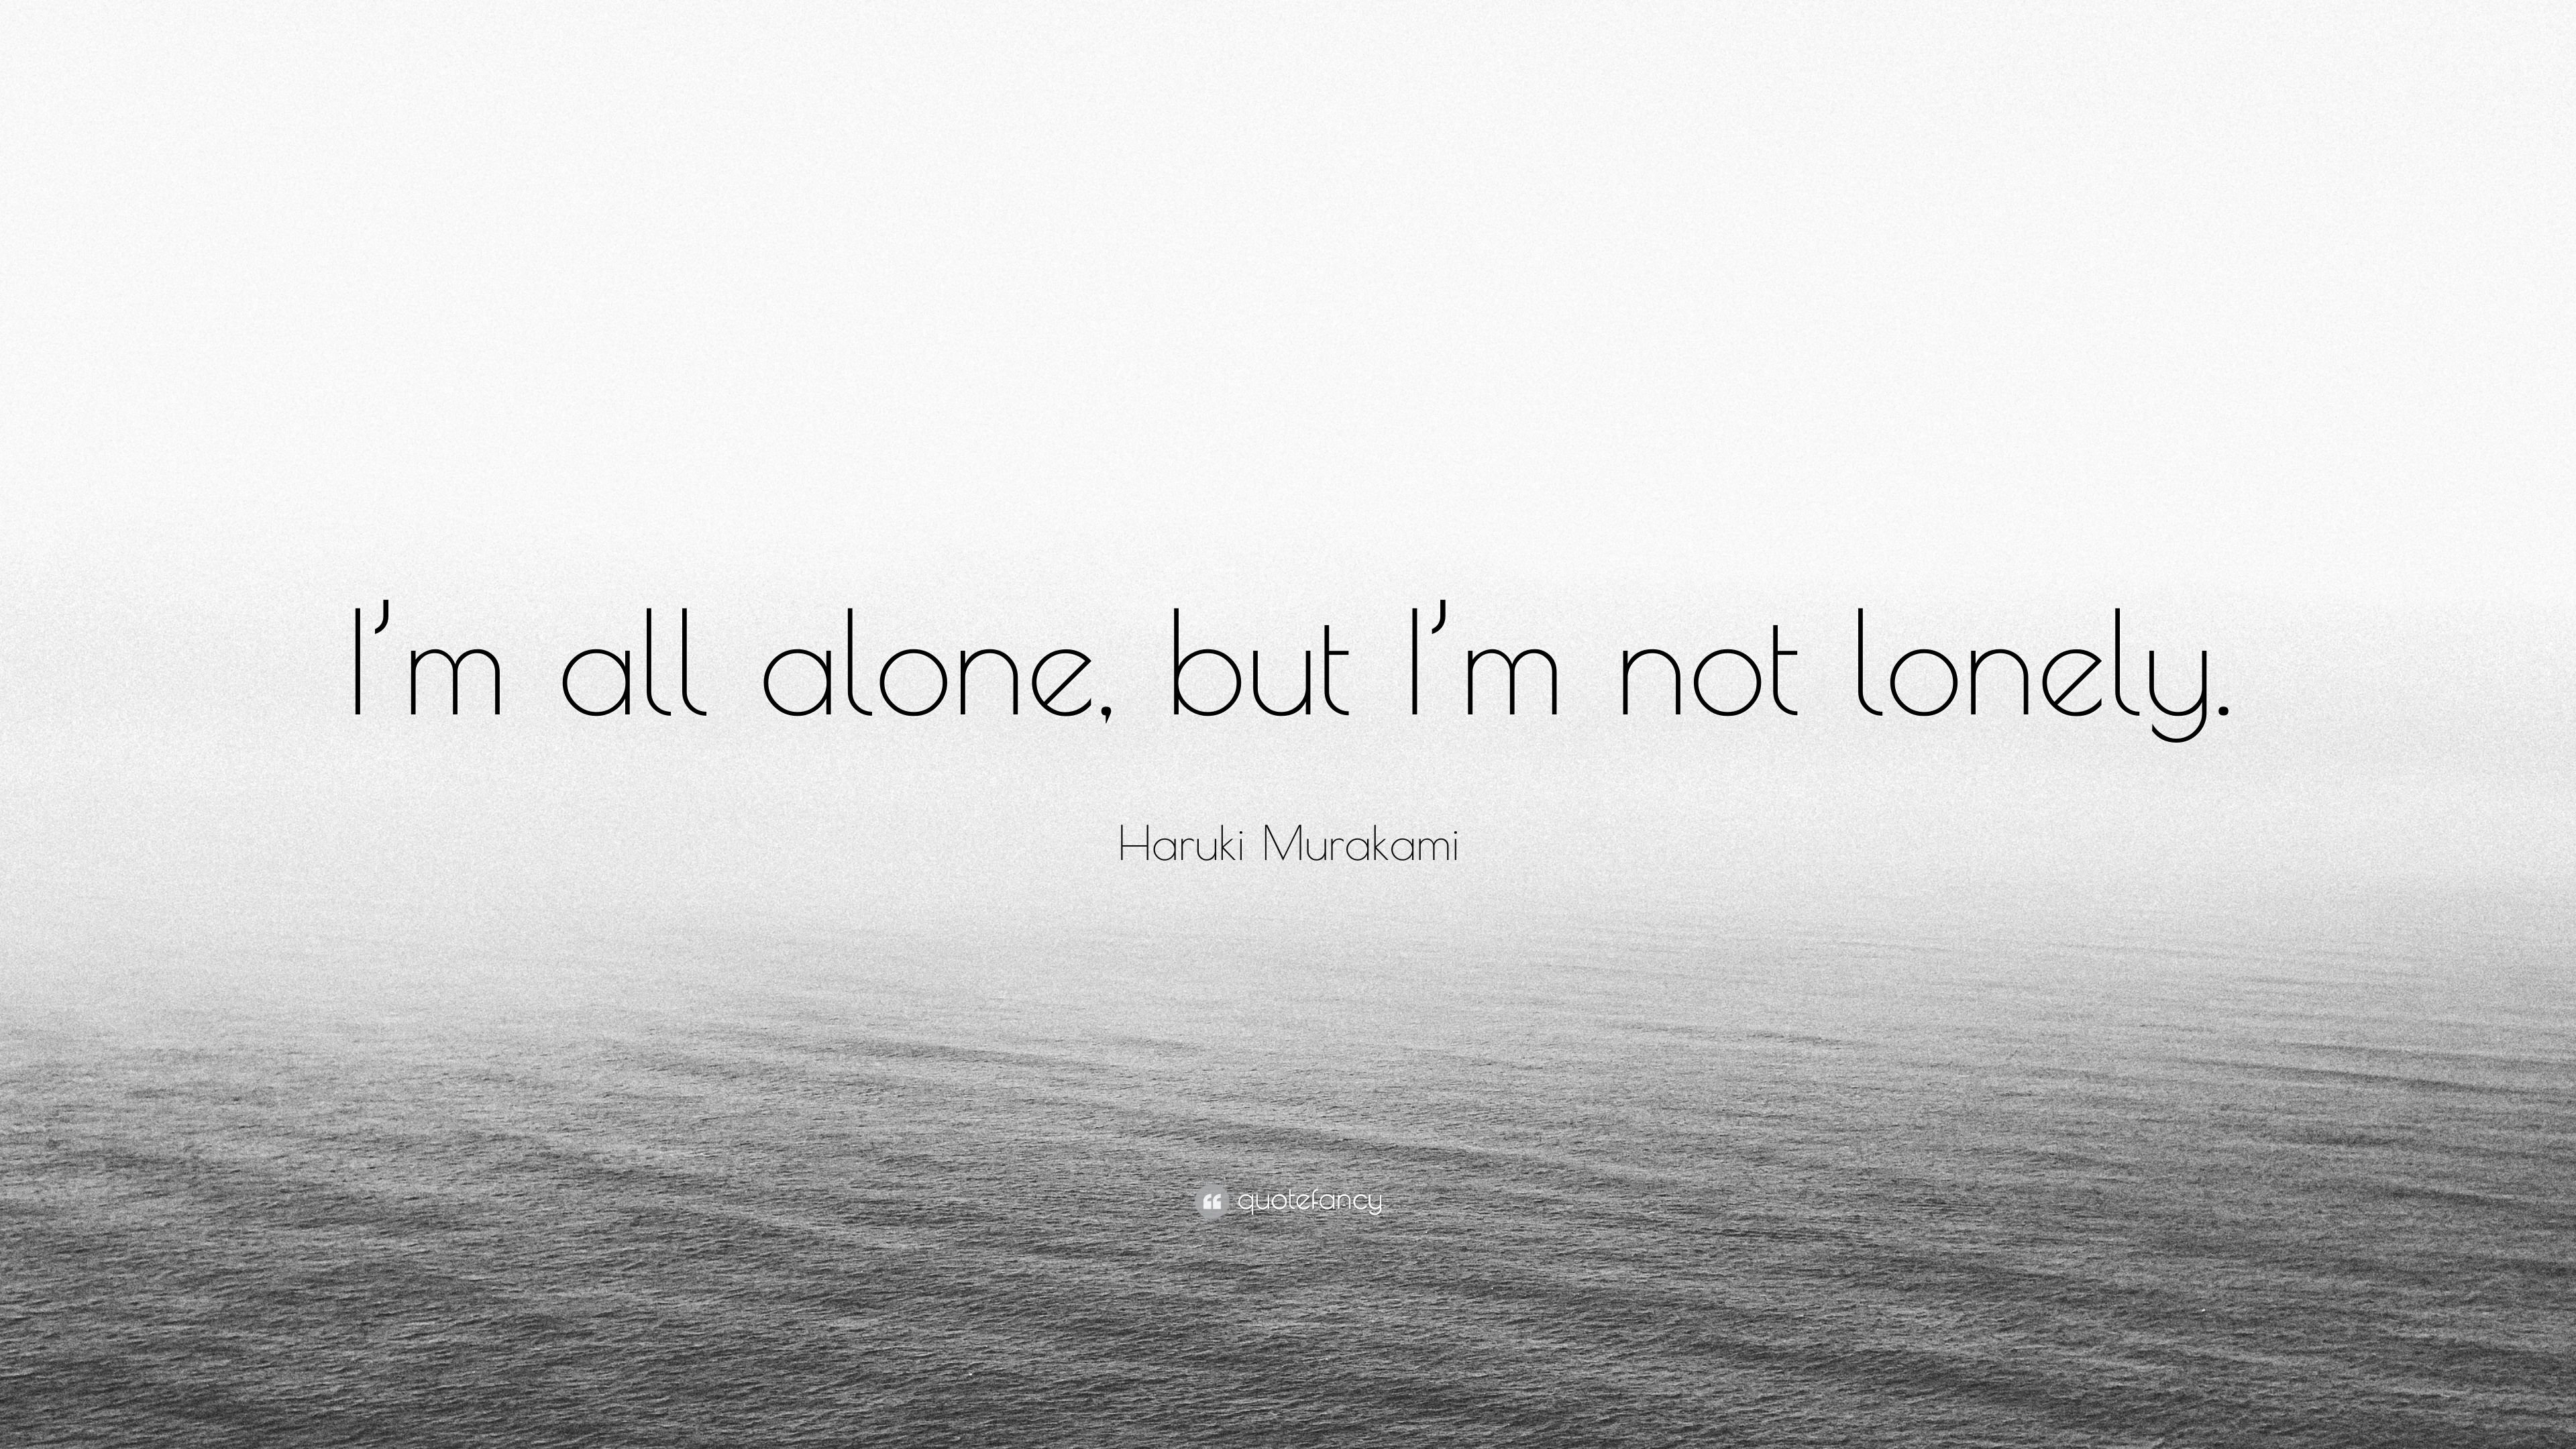 Haruki Murakami Quote: "I'm all alone, but I'm not lonely. 